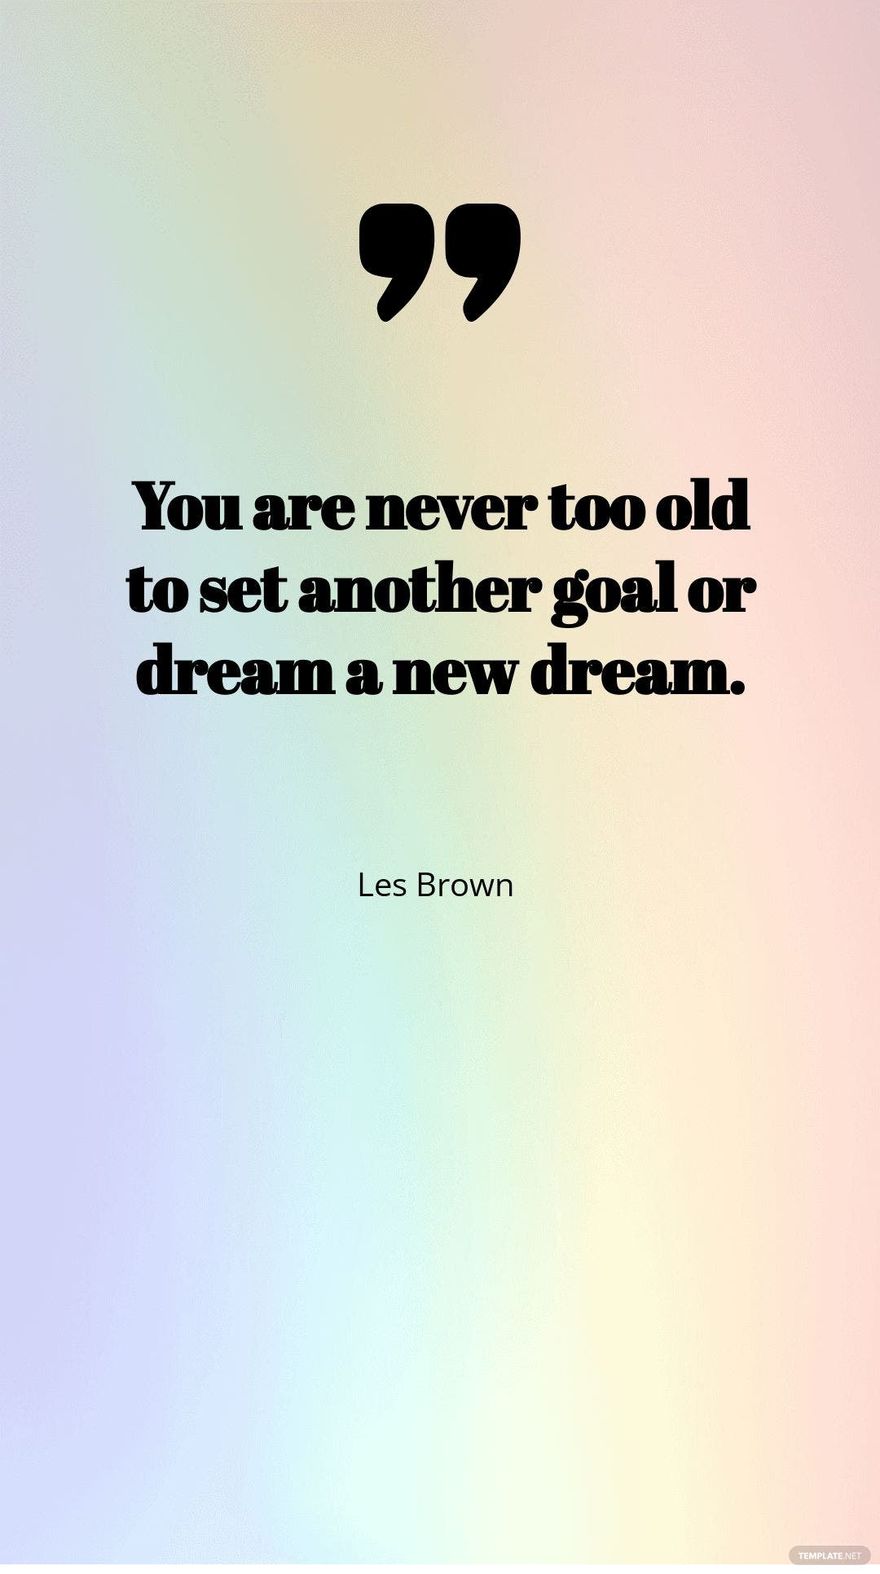 Les Brown - You are never too old to set another goal or dream a new dream.